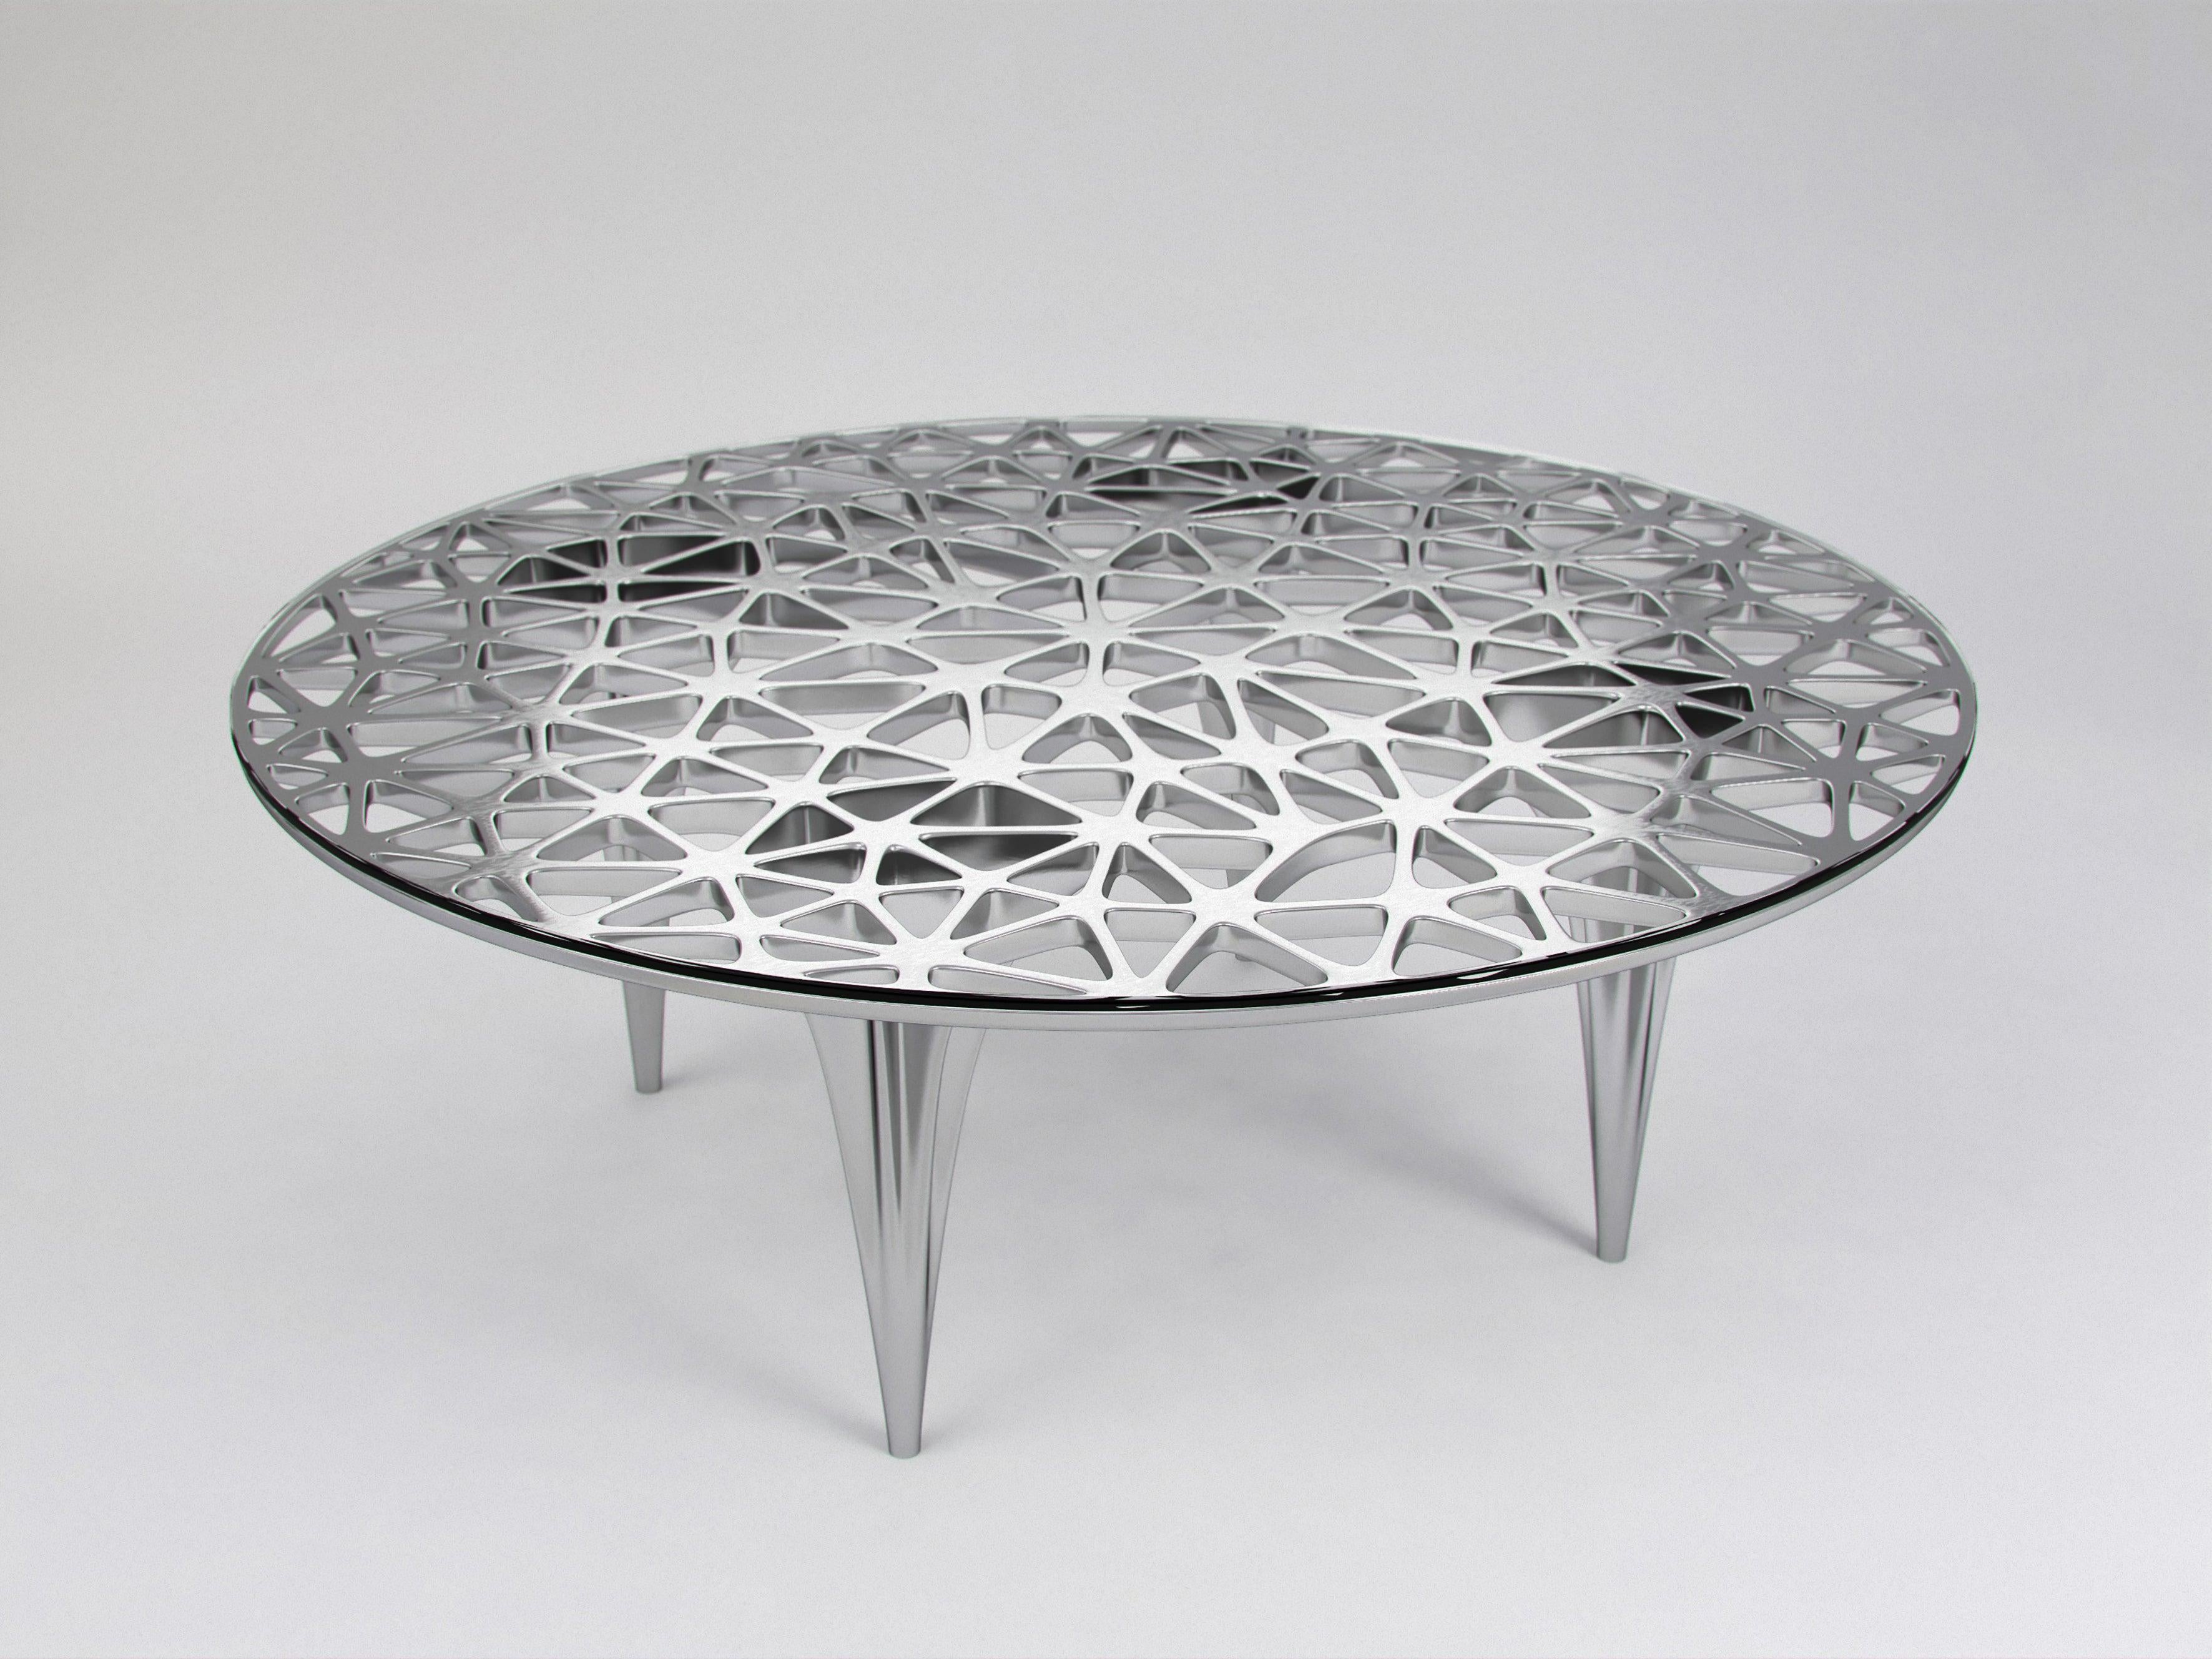 American Sedona Stainless Steel Round Coffee Table by Janne Kyttanen For Sale